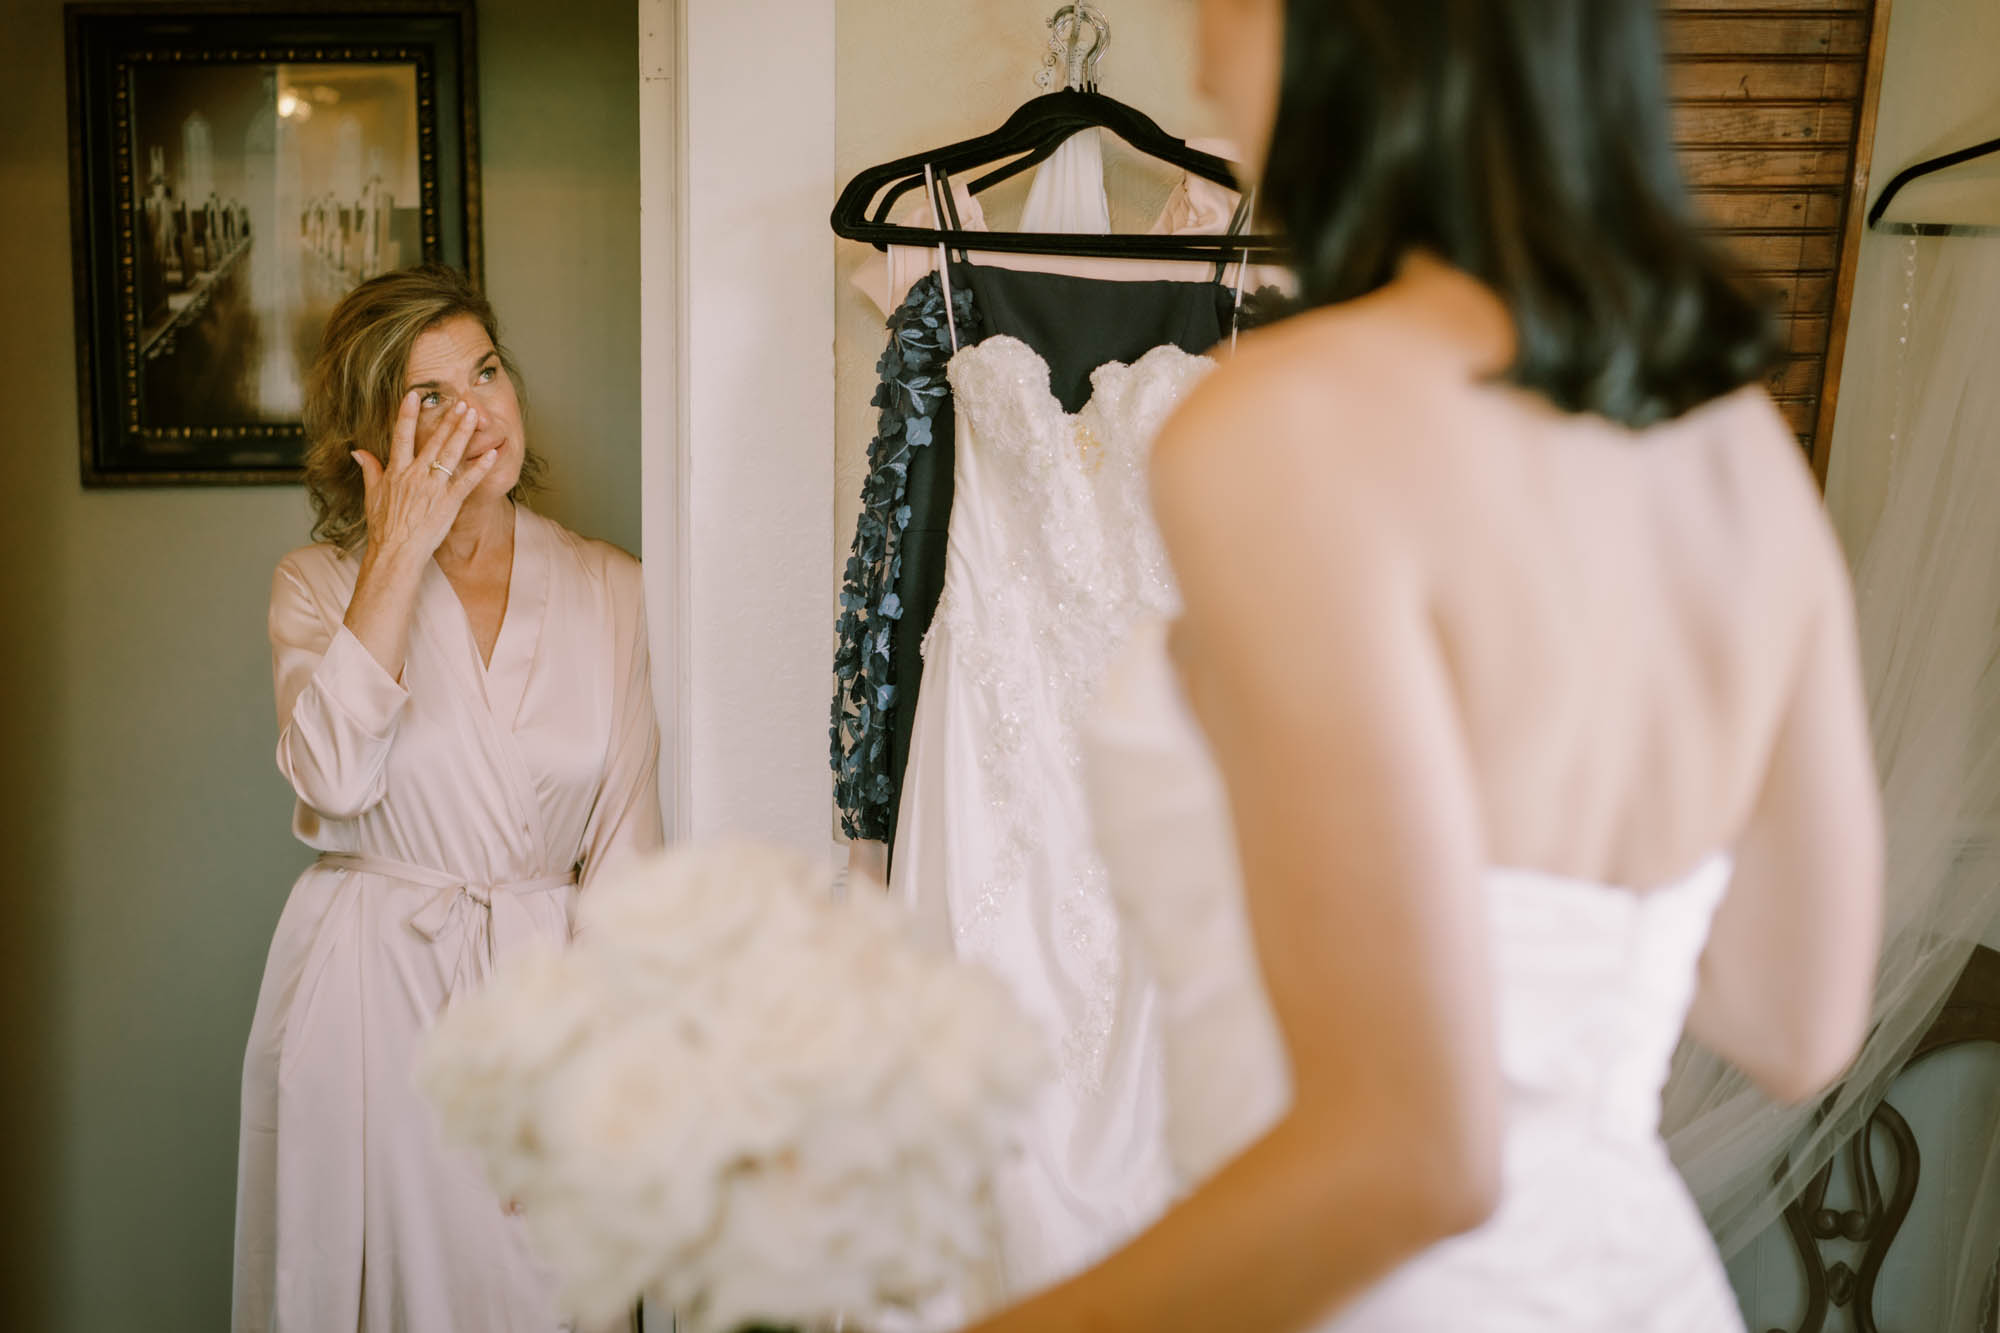 Alexa's mom tears up seeing her in her bridal gown